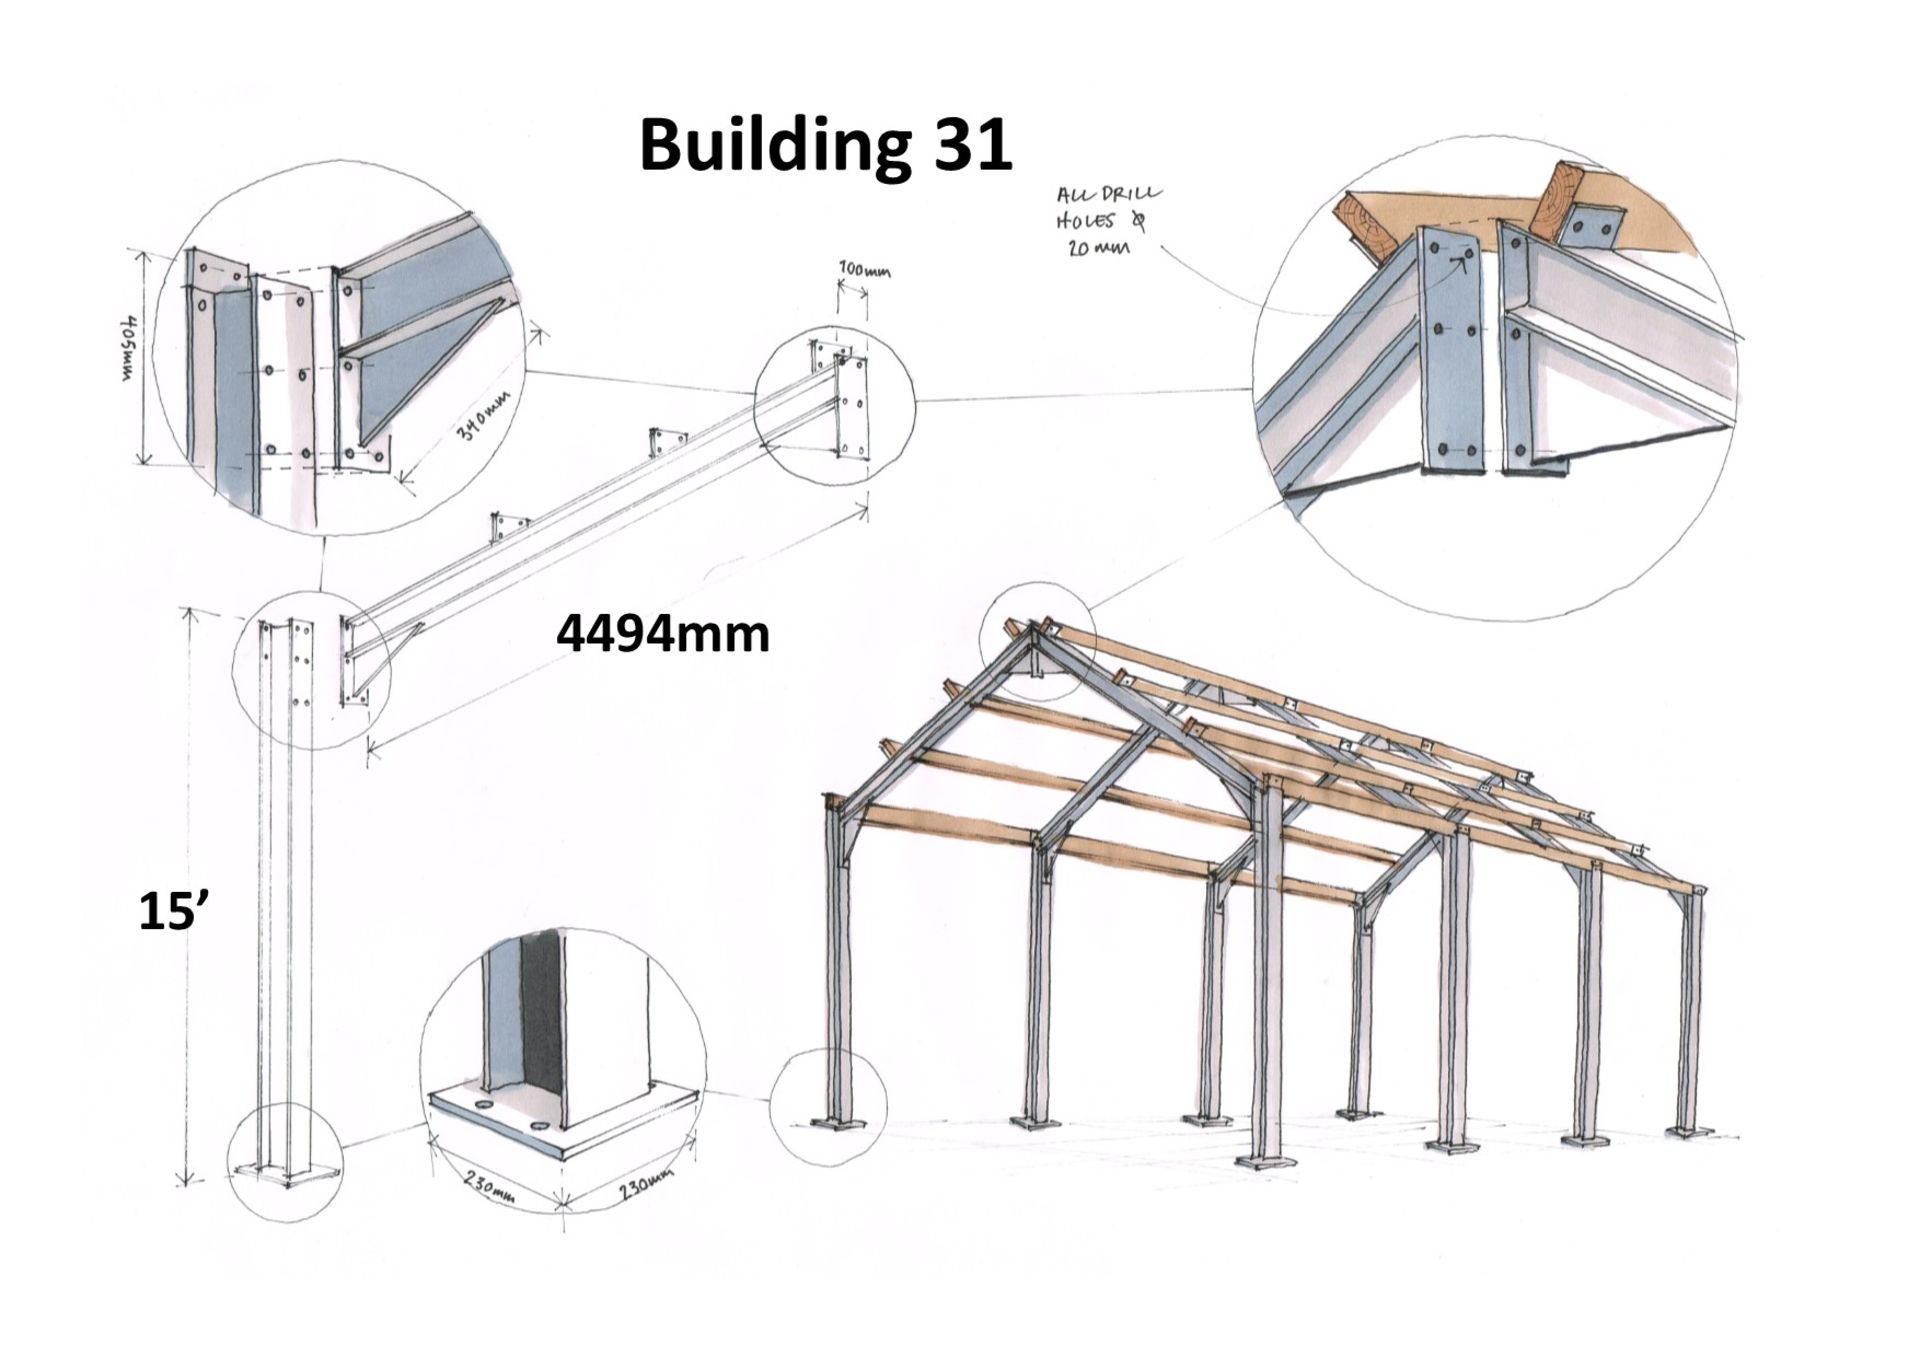 Apex Steel Framework on 15ft bays, with Purlins and Fixings. 75ft long x 30ft wide x 15ft @ eaves - Image 9 of 10